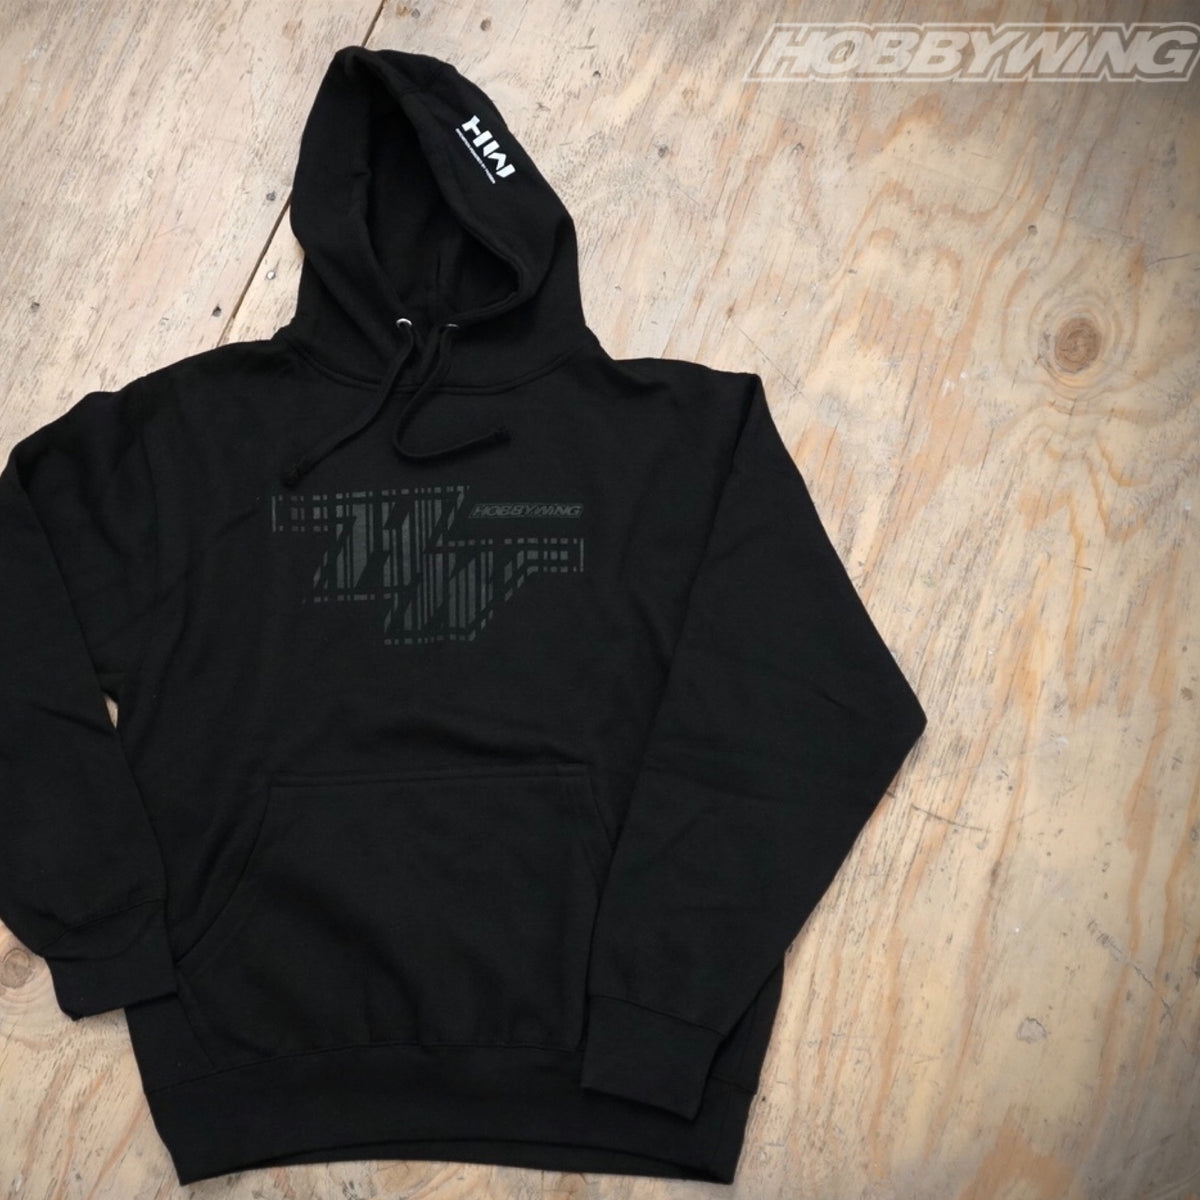 HOBBYWING HOODIE- Nerd The New cool edition